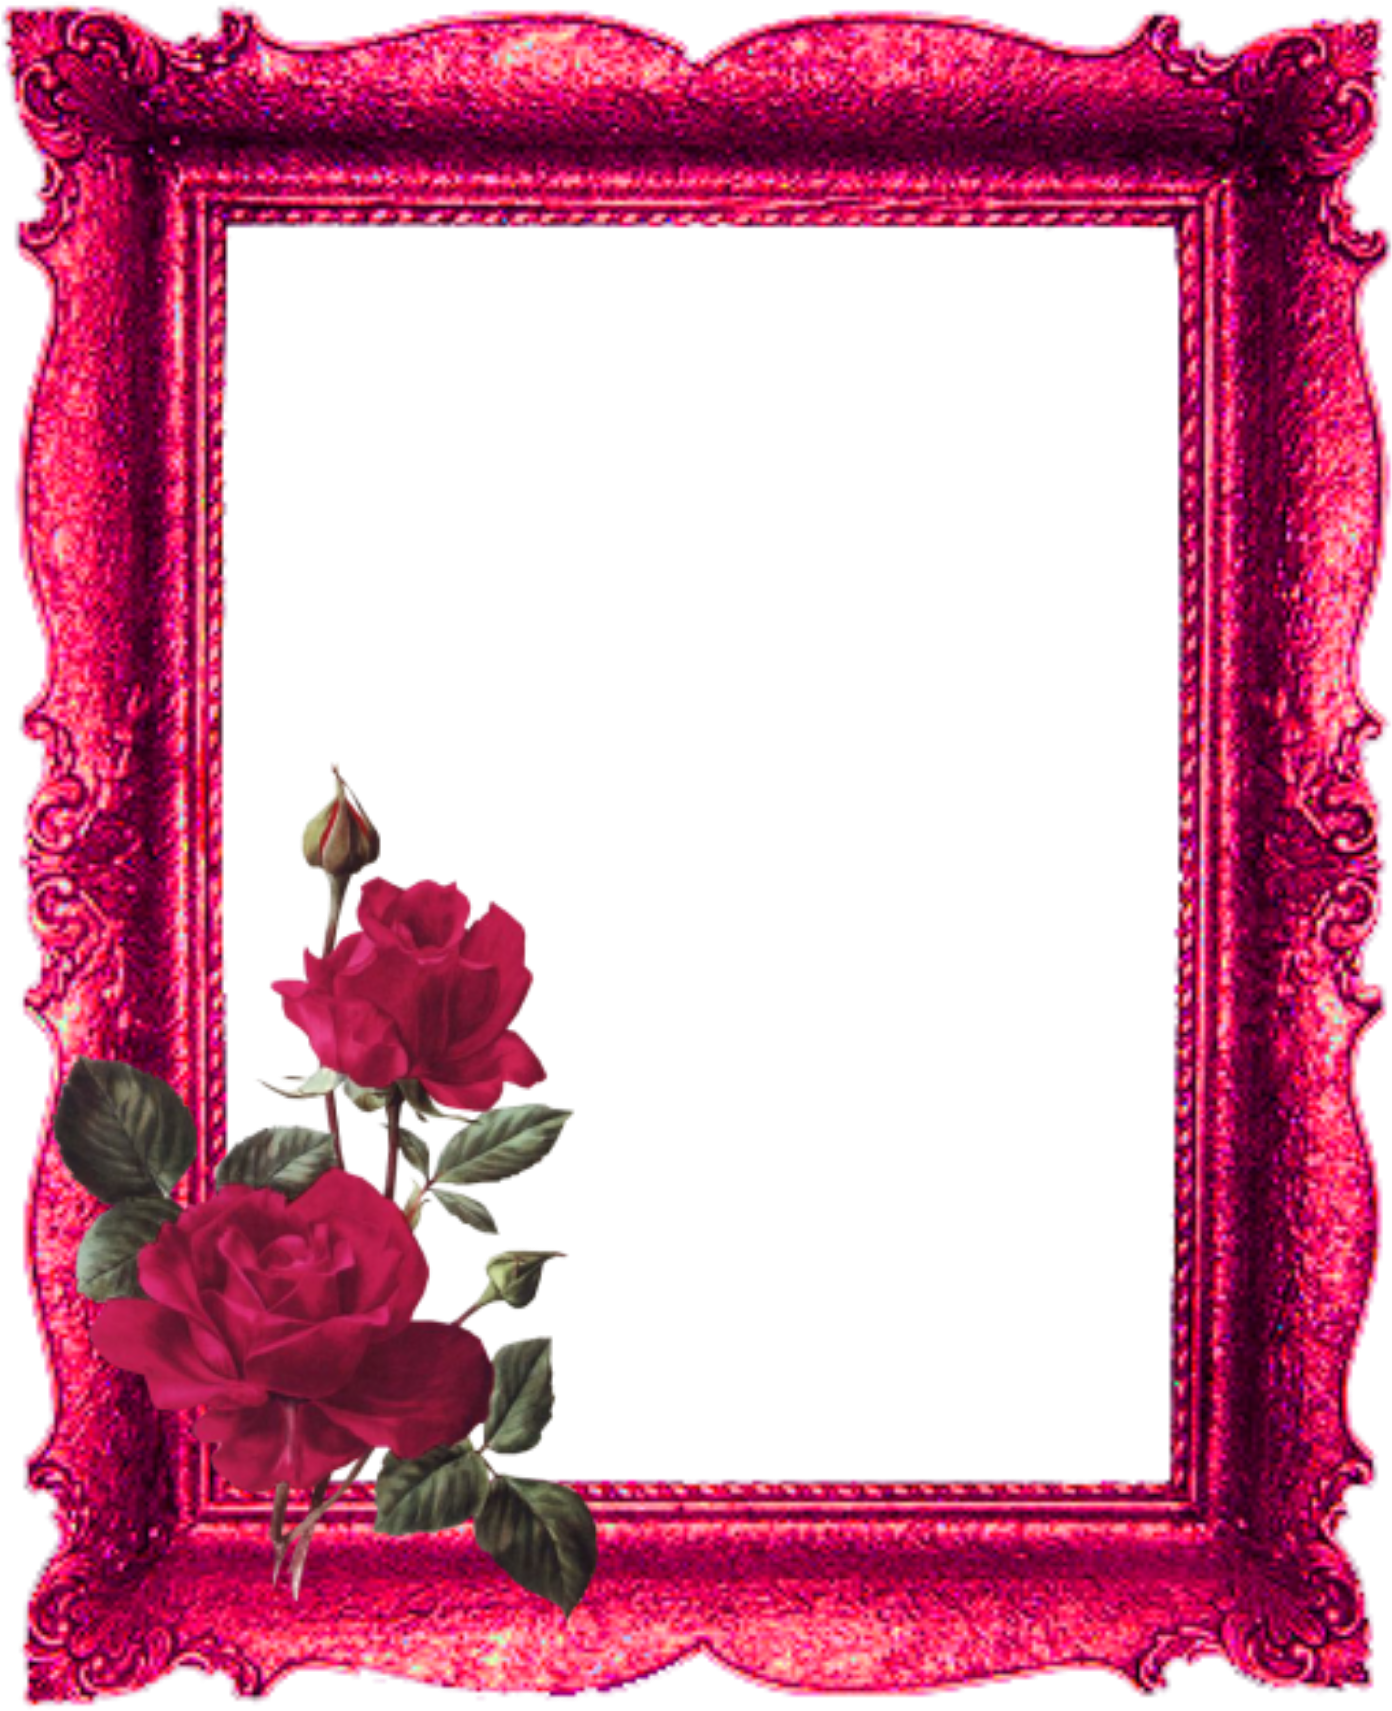 A Pink Frame With A Rose On It